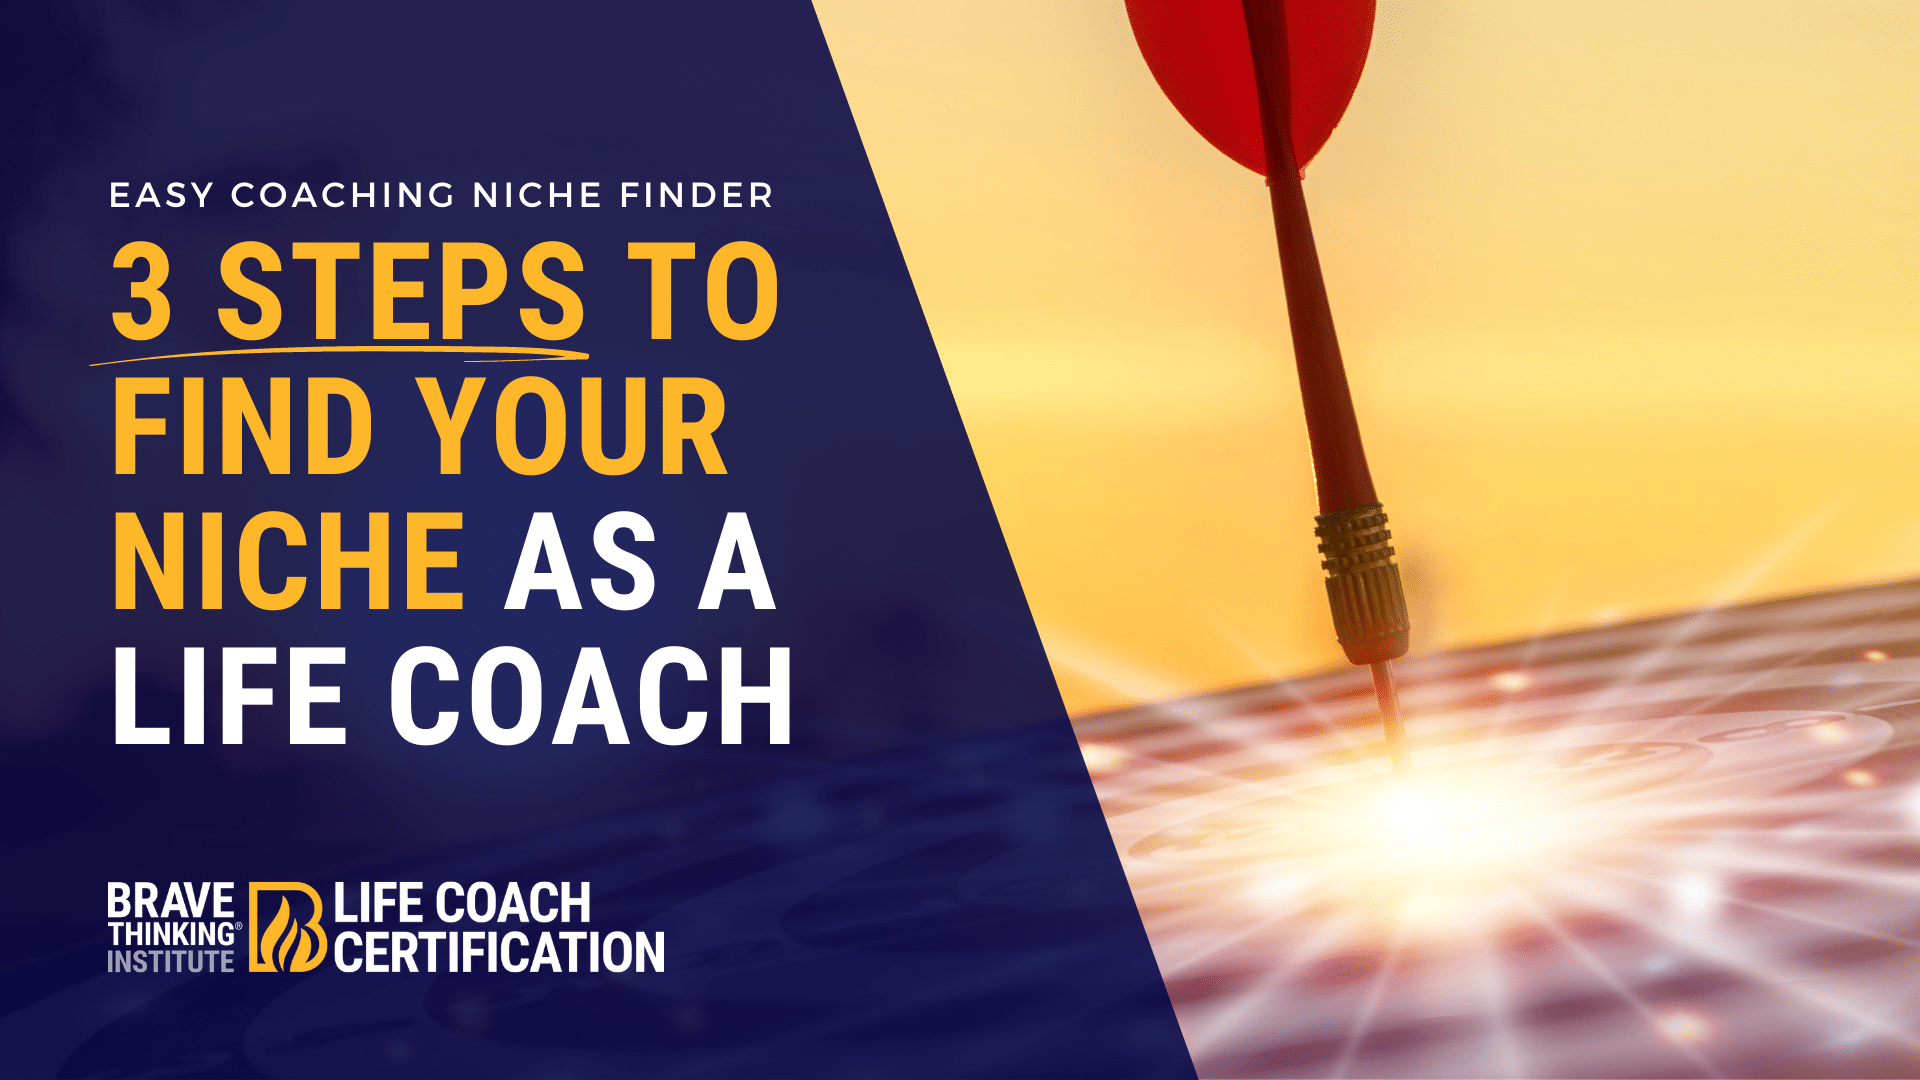 Coaching Niche Finder | How to Find Your Niche as a Life Coach